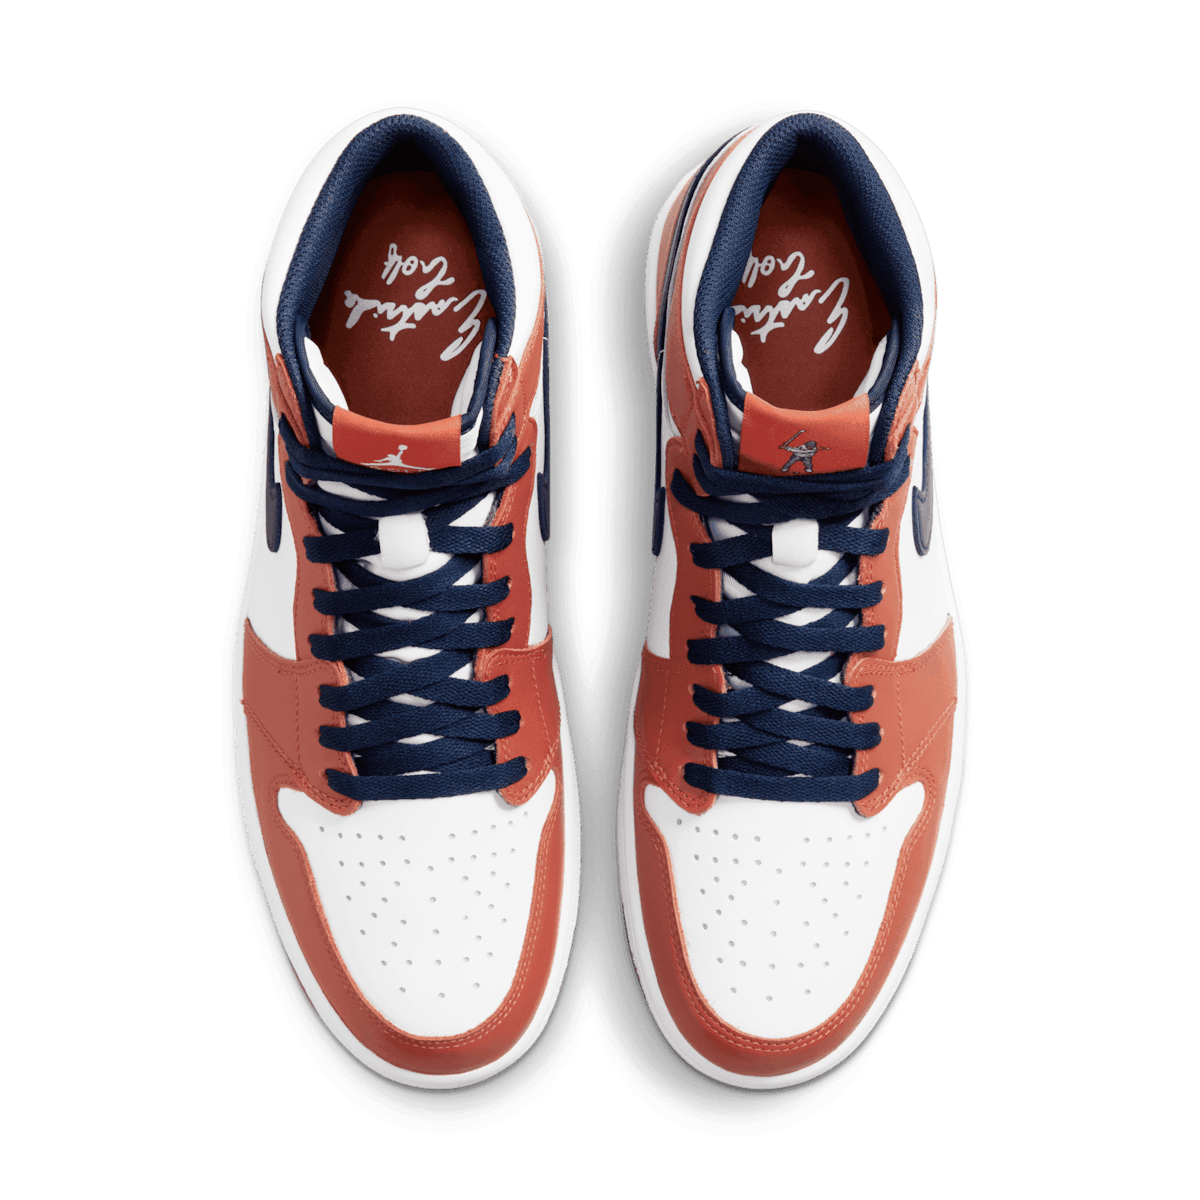 Jordan 1 High Eastside Golf Out of the Mud Angle 1